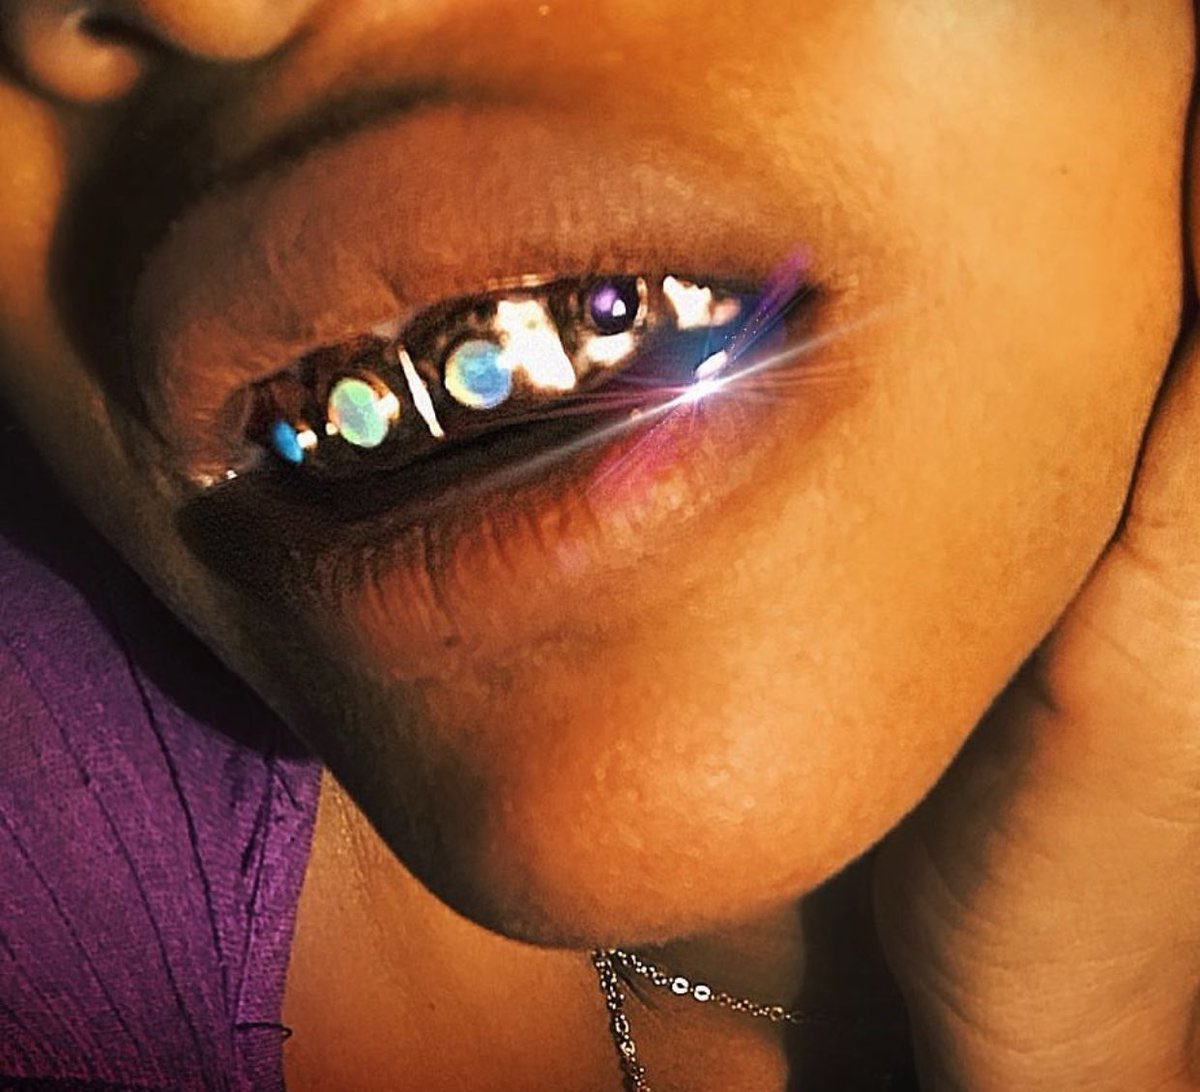 Dental embellishments were also worn by Mayans, who drilled holes in their teeth and replaced them with stones. This concept influenced Erykah Badu’s 2015 grill. “Opal, Amethyst, Turquoise and Moonstone. Inspired by a Mayan skull found in Mesoamerica circa 500 BC” —Badu